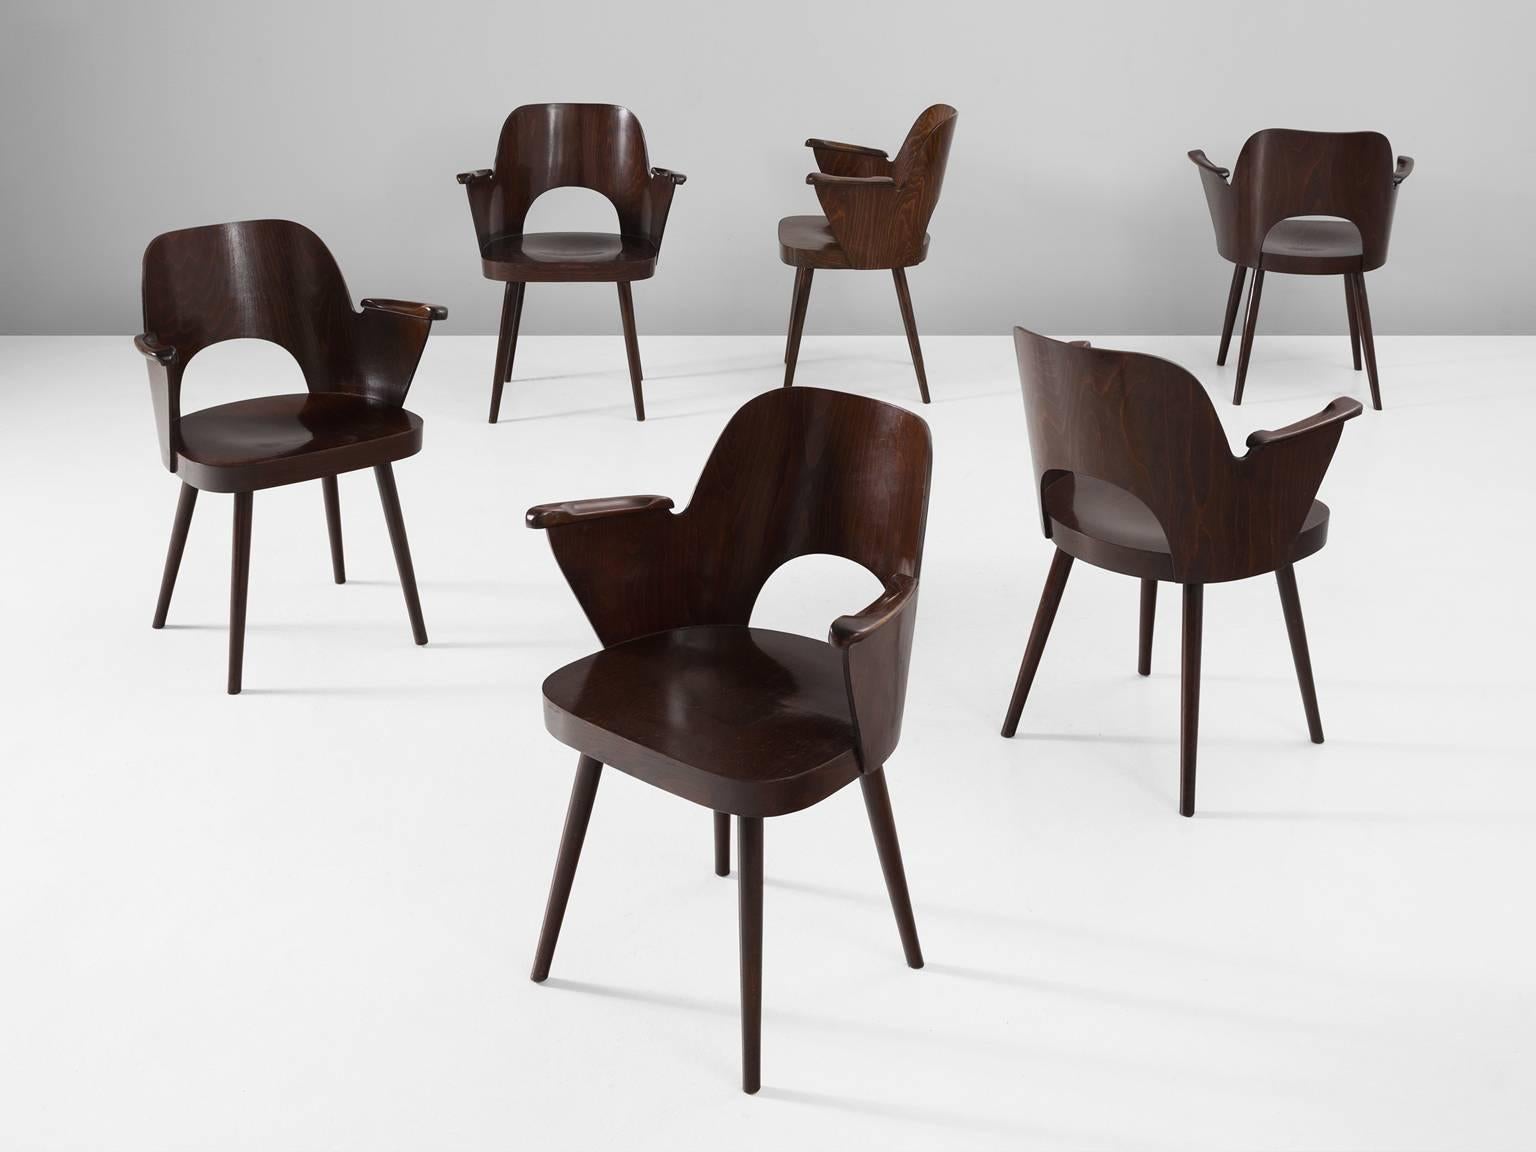 Set of six armchairs, in beech, by Oswald Haerdtl for Thonet, Czech Republic, 1955.

Set of six bended plywood armchairs in beech. These chairs were designed by Oswald Haerdtl for the famous bentwood manufacturer Thonet. These chairs show nice